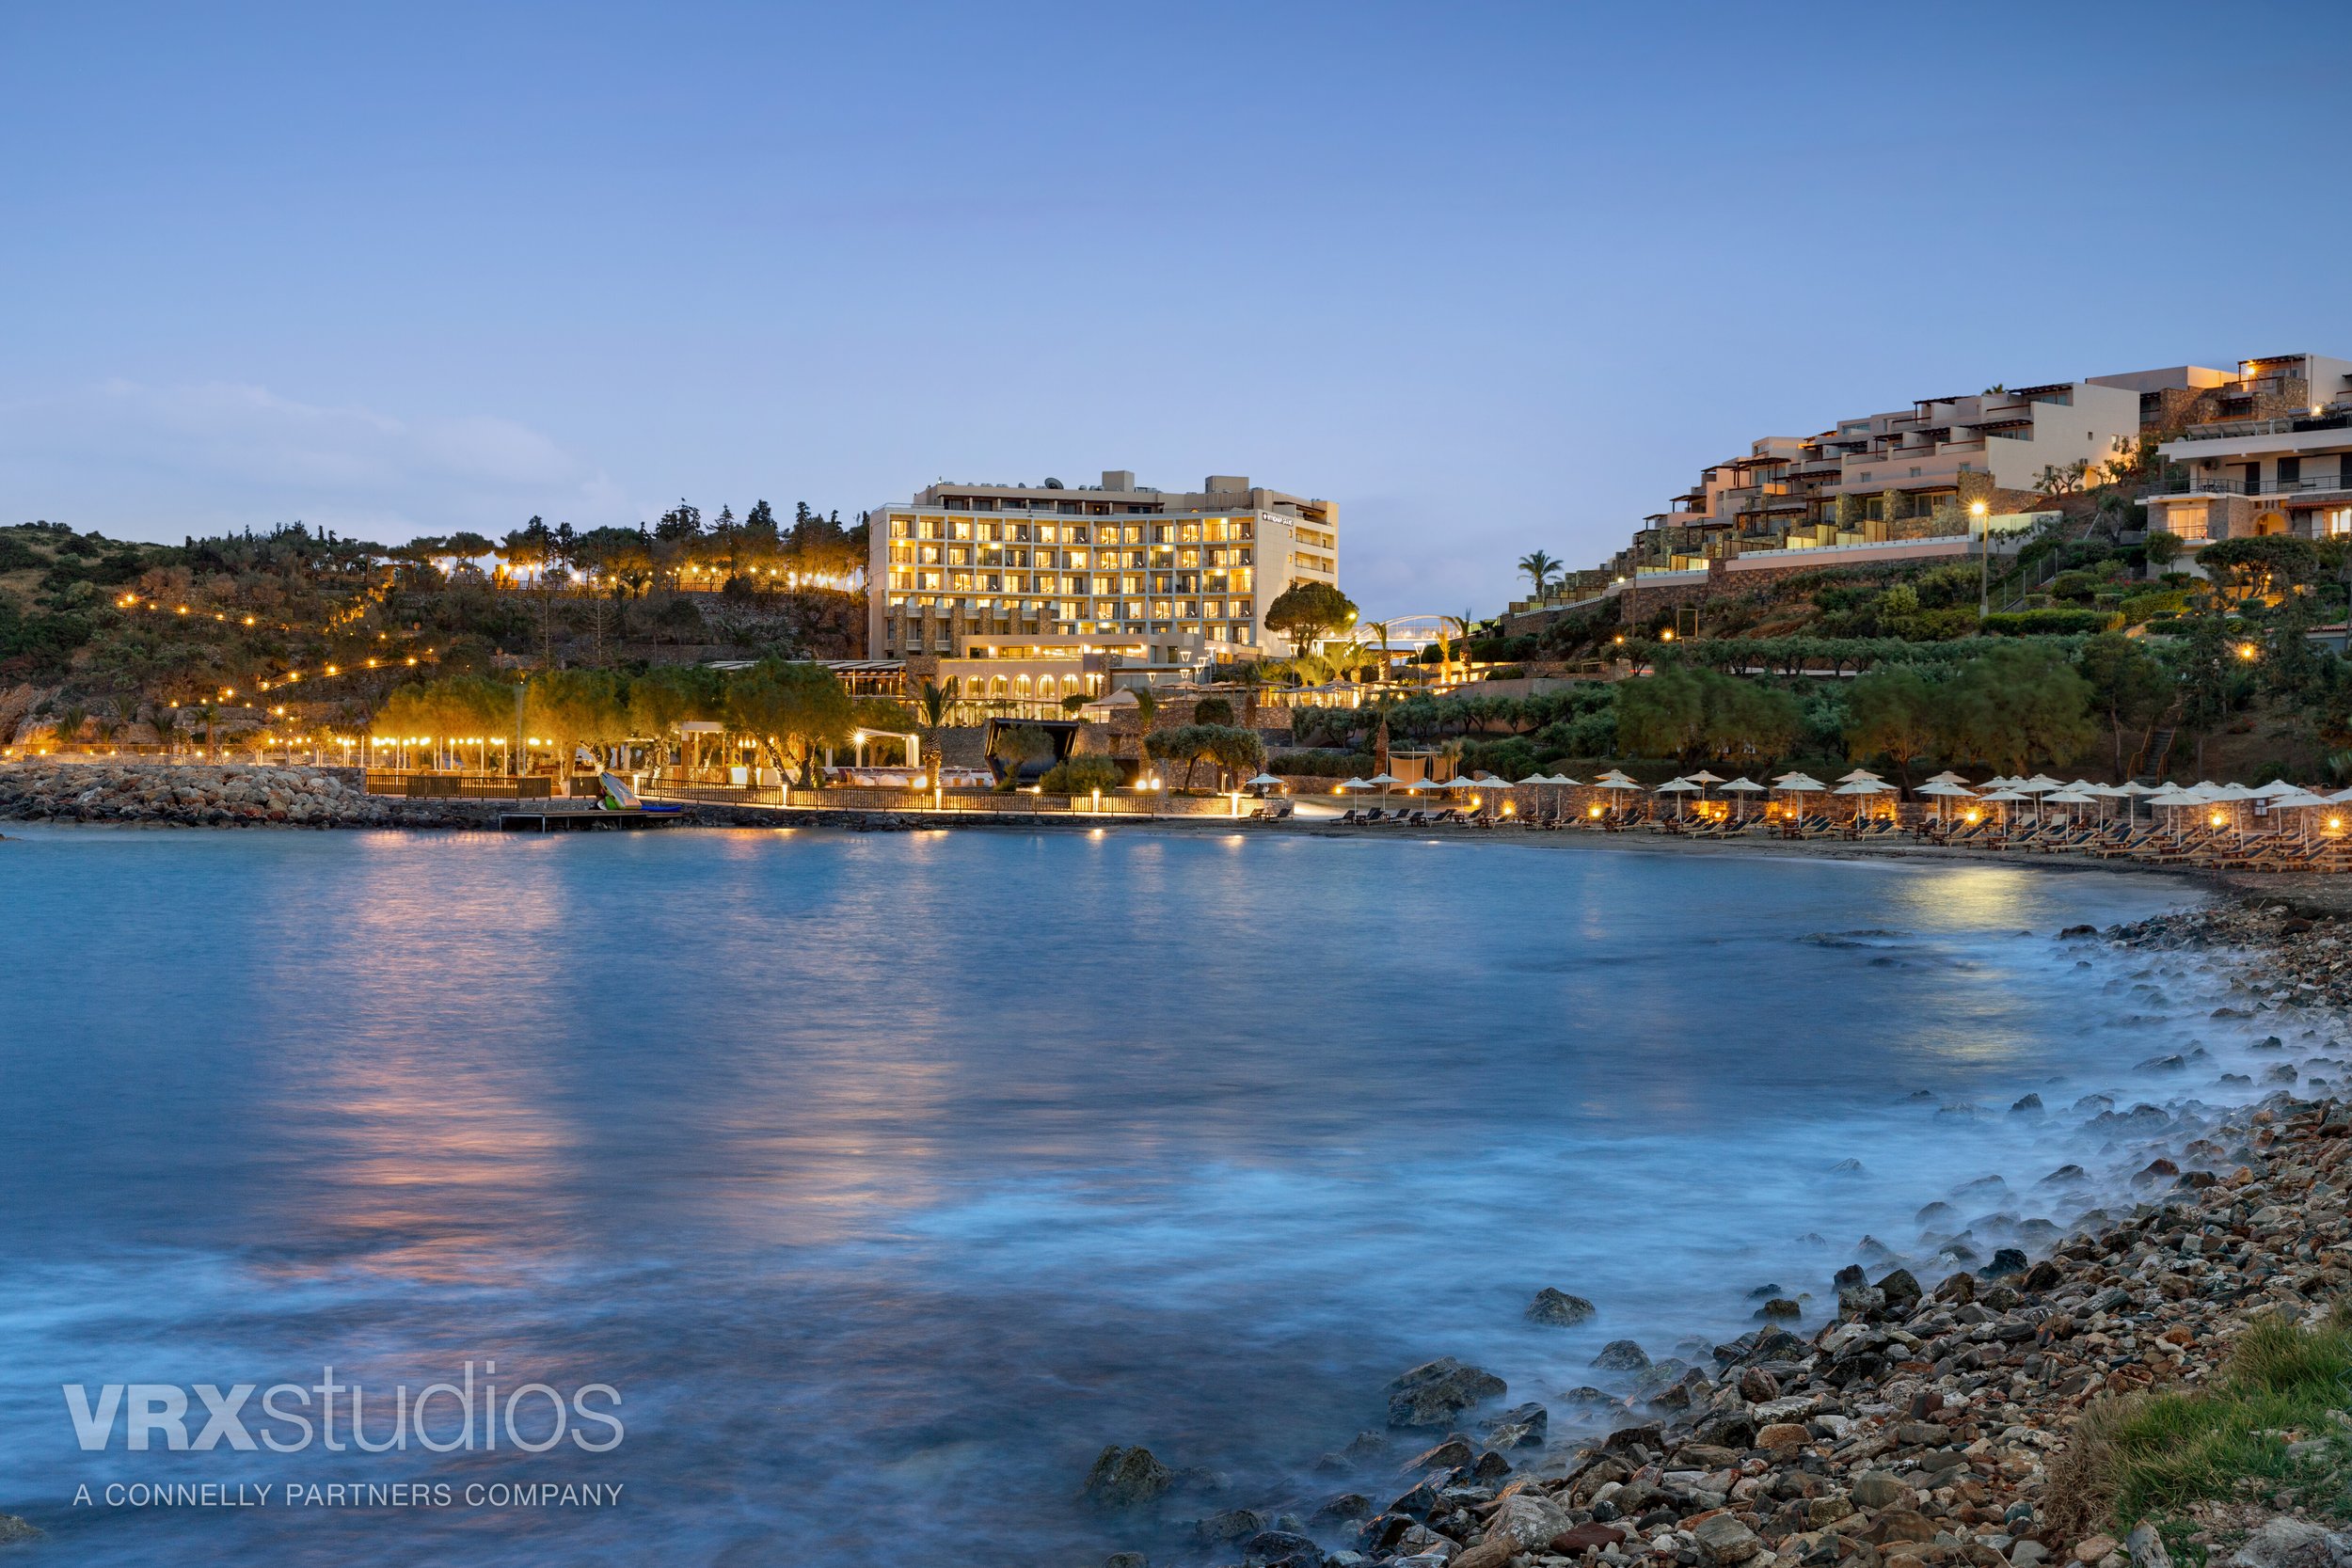  Client: VRX Studios • Project: Wyndham Grand Crete Mirabello, Greece • Photographer: Marcelo Barbosa • Produced by: VRX Studios 08/05/2022 